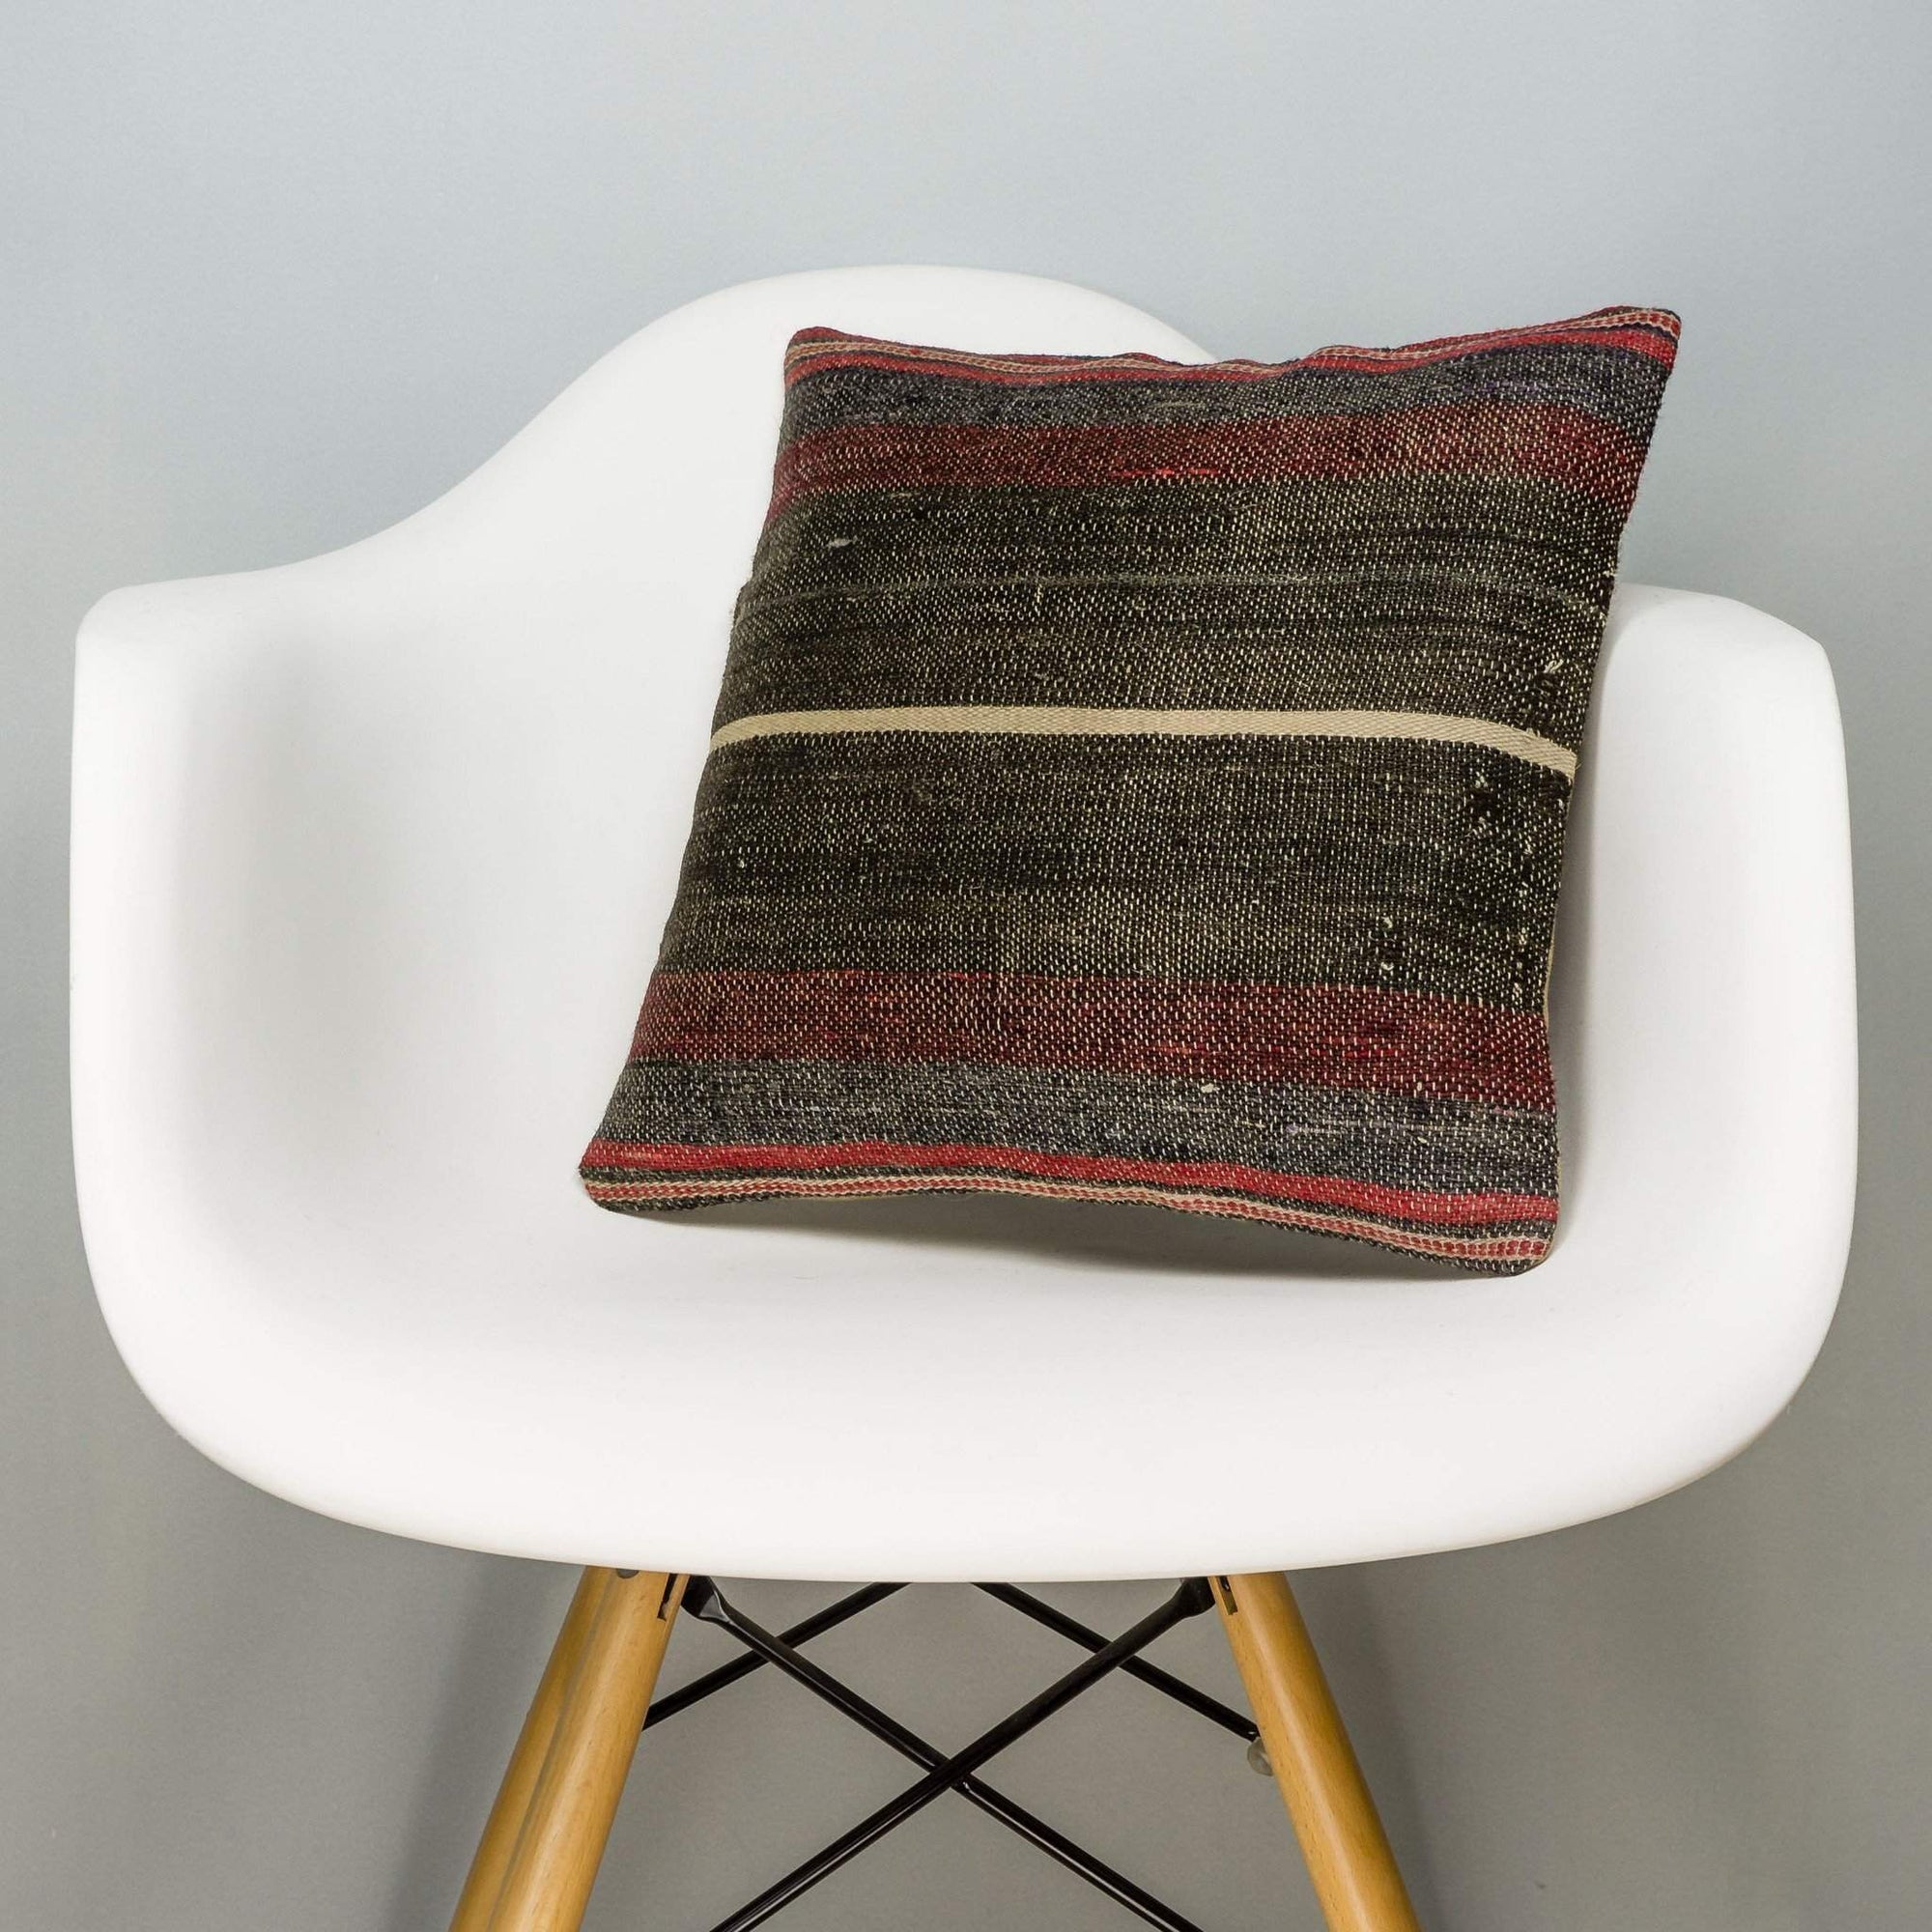 Striped Brown Kilim Pillow Cover 16x16 2855 - kilimpillowstore
 - 1